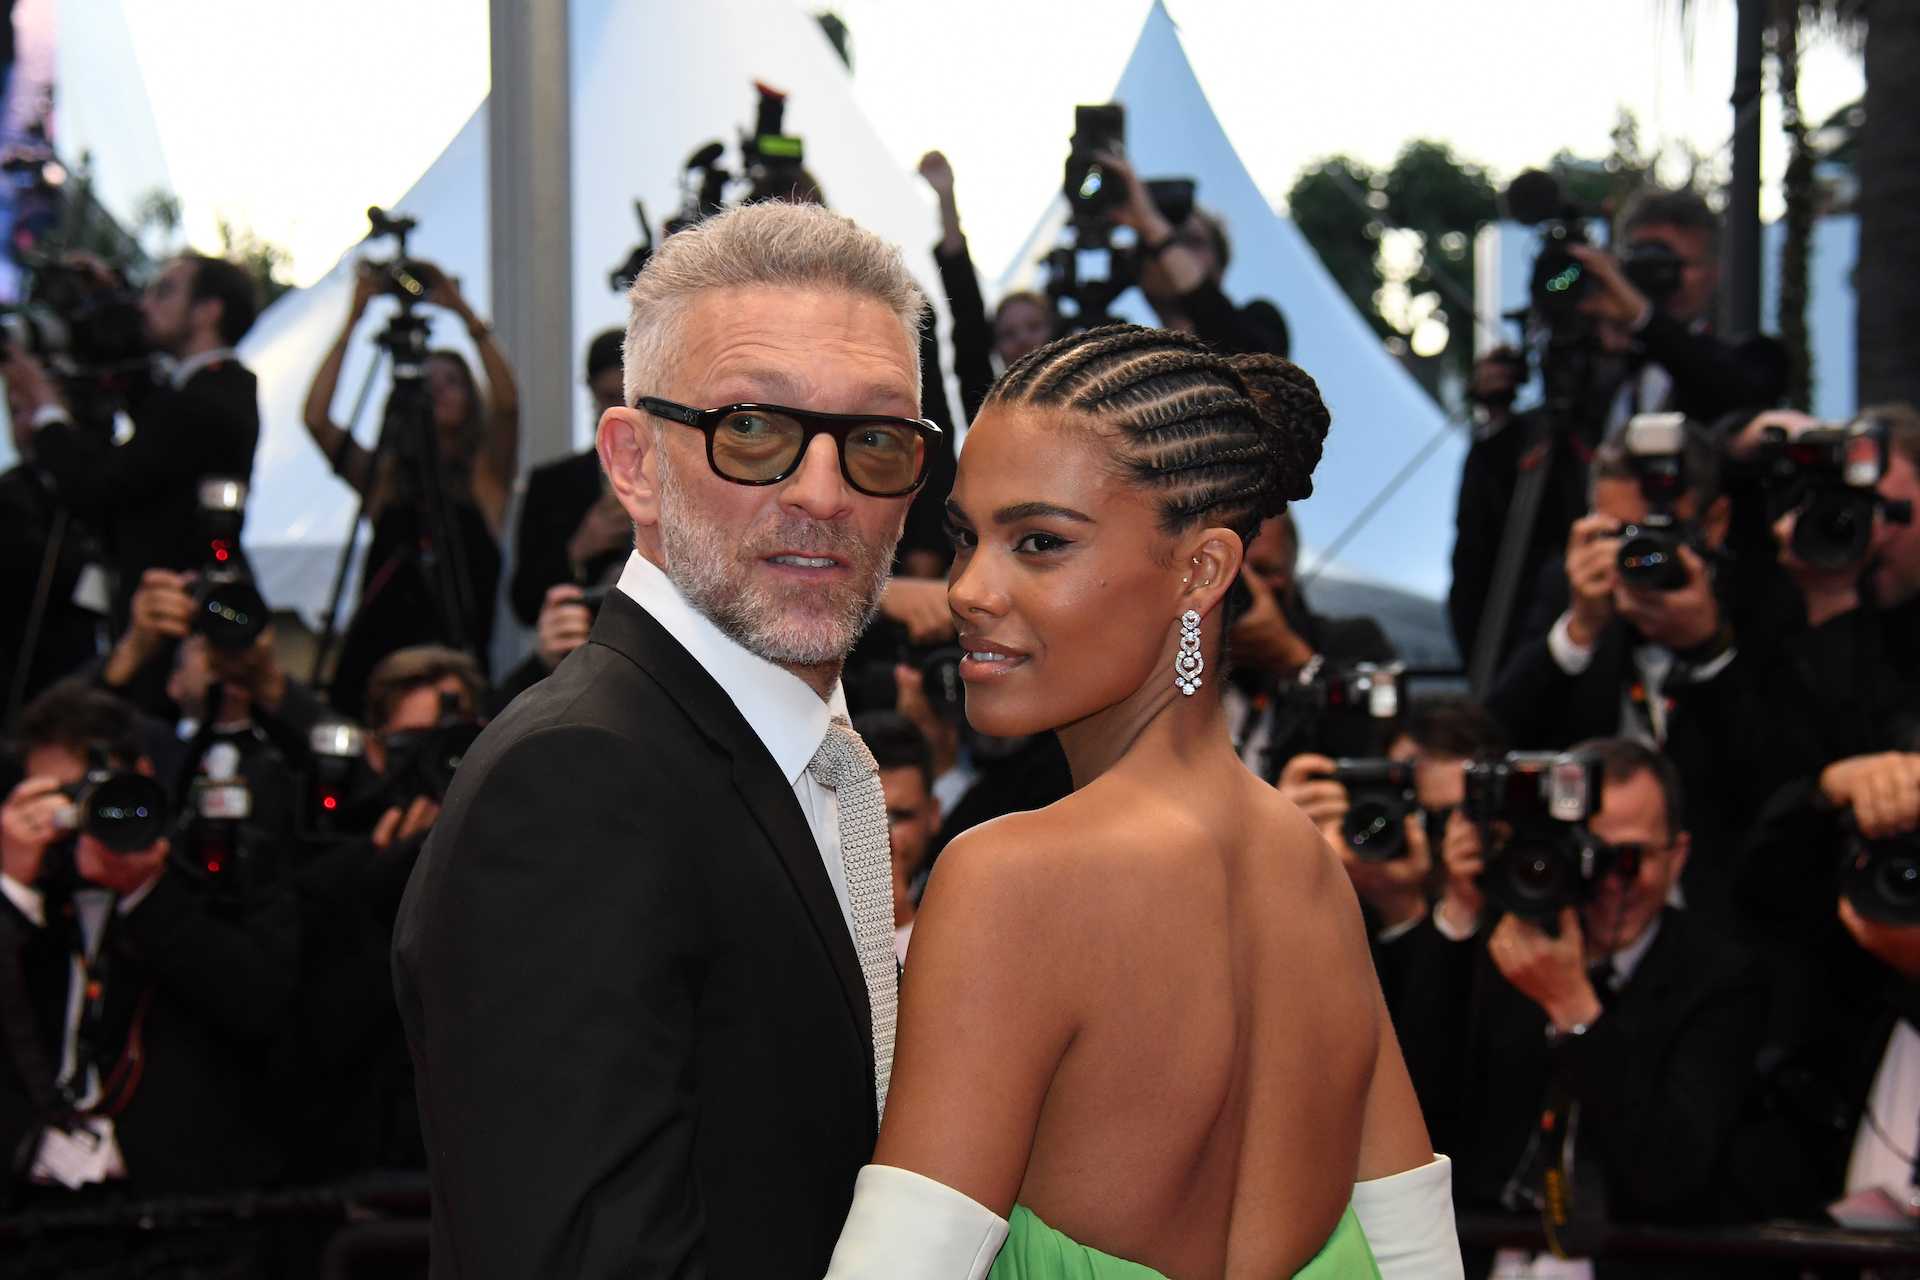 Vincent Cassel and his wife Tina Kunakey